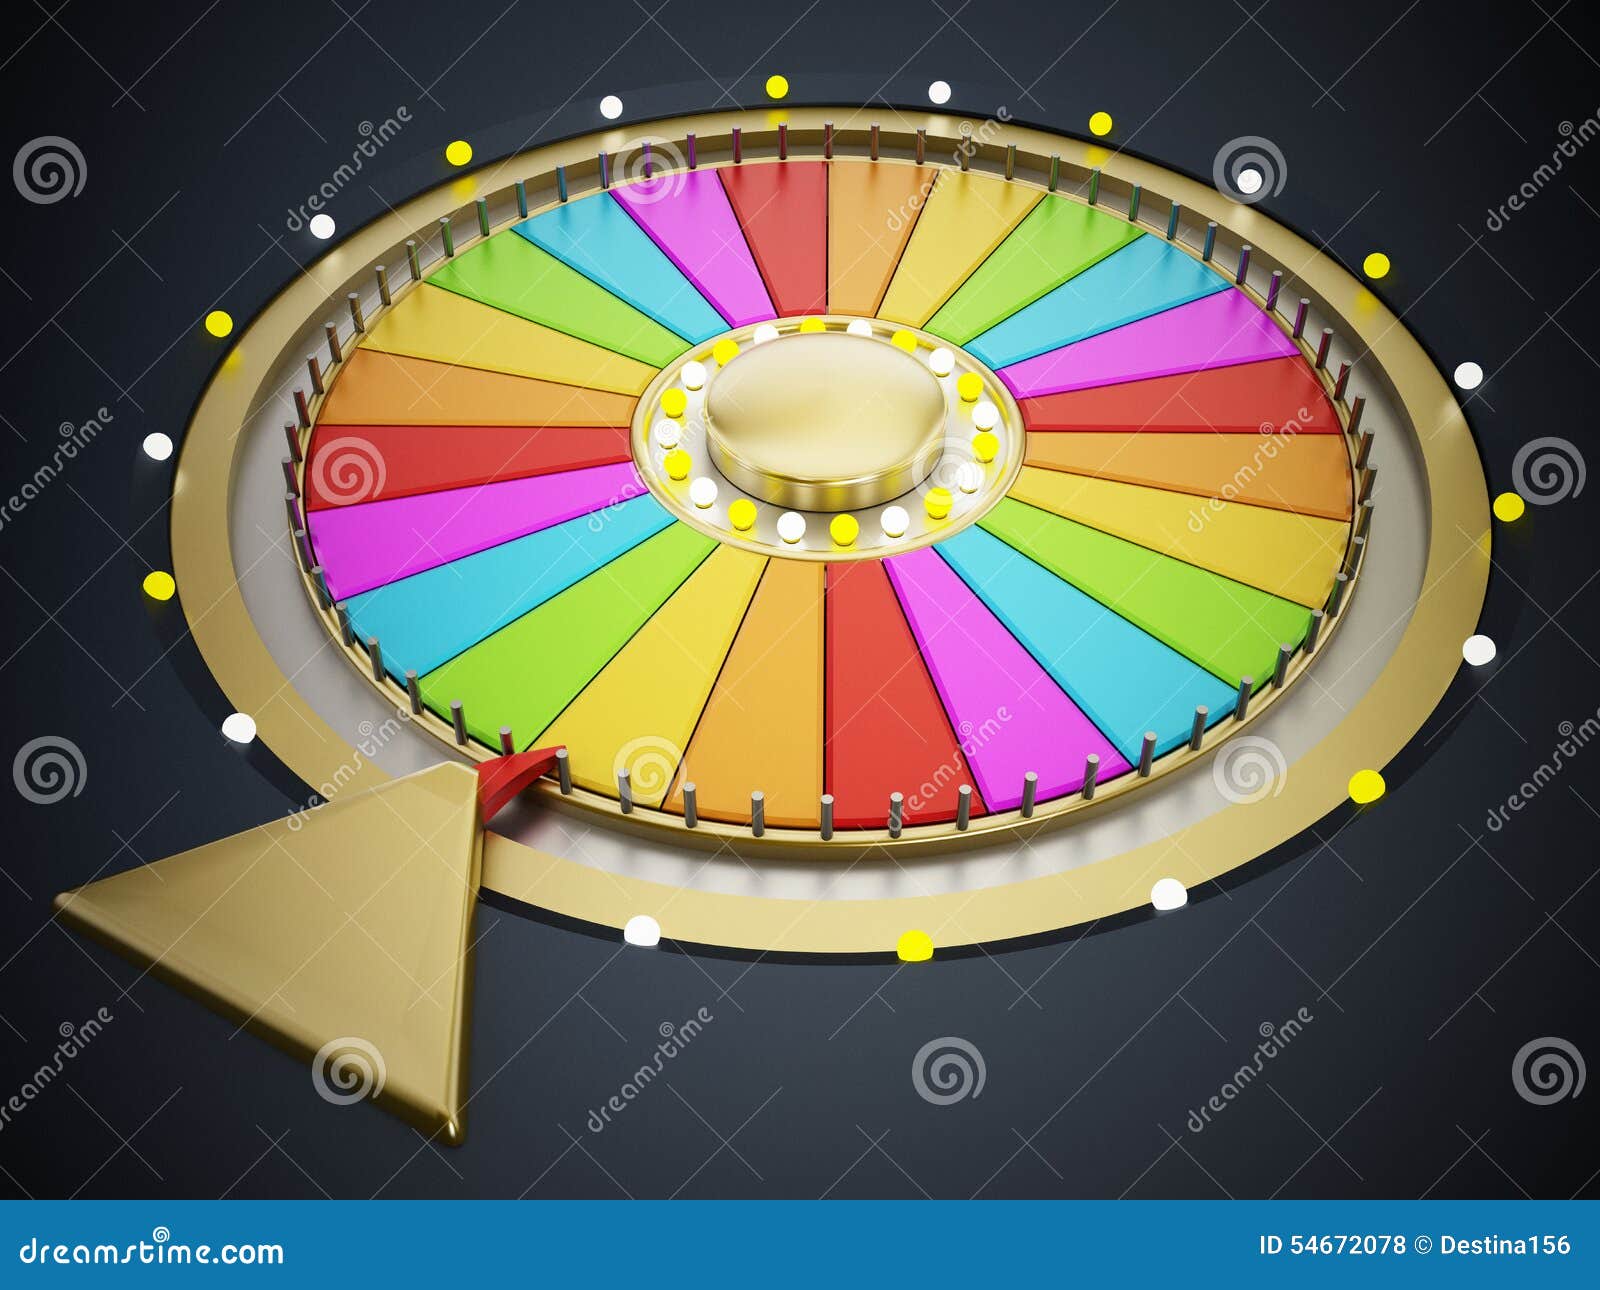 Figit Spinners Game Prize Wheel Game Spinners Wheel Prize Winner Wheel  Tabletop Prize Wheel Carnival Wheel Prize Draw Wheel | Fruugo TR